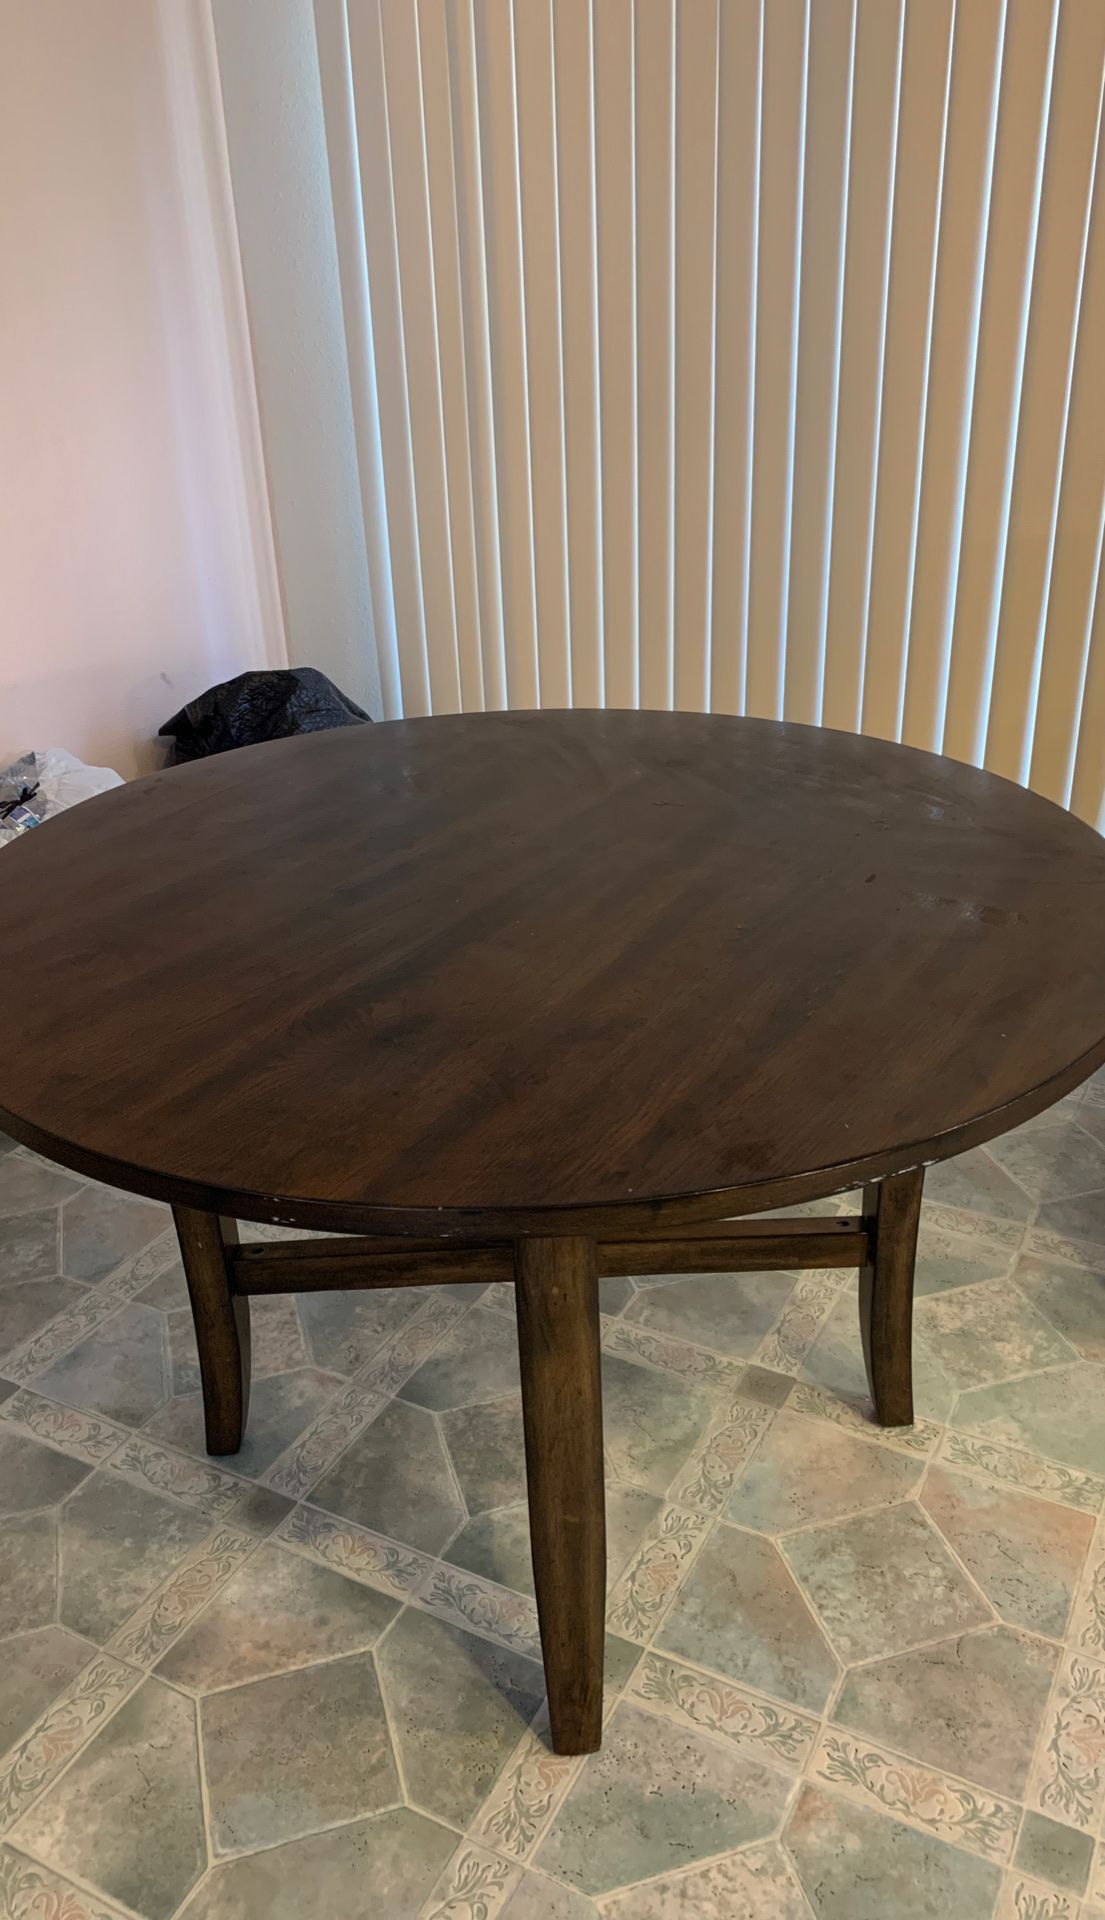 Used kitchen Round table